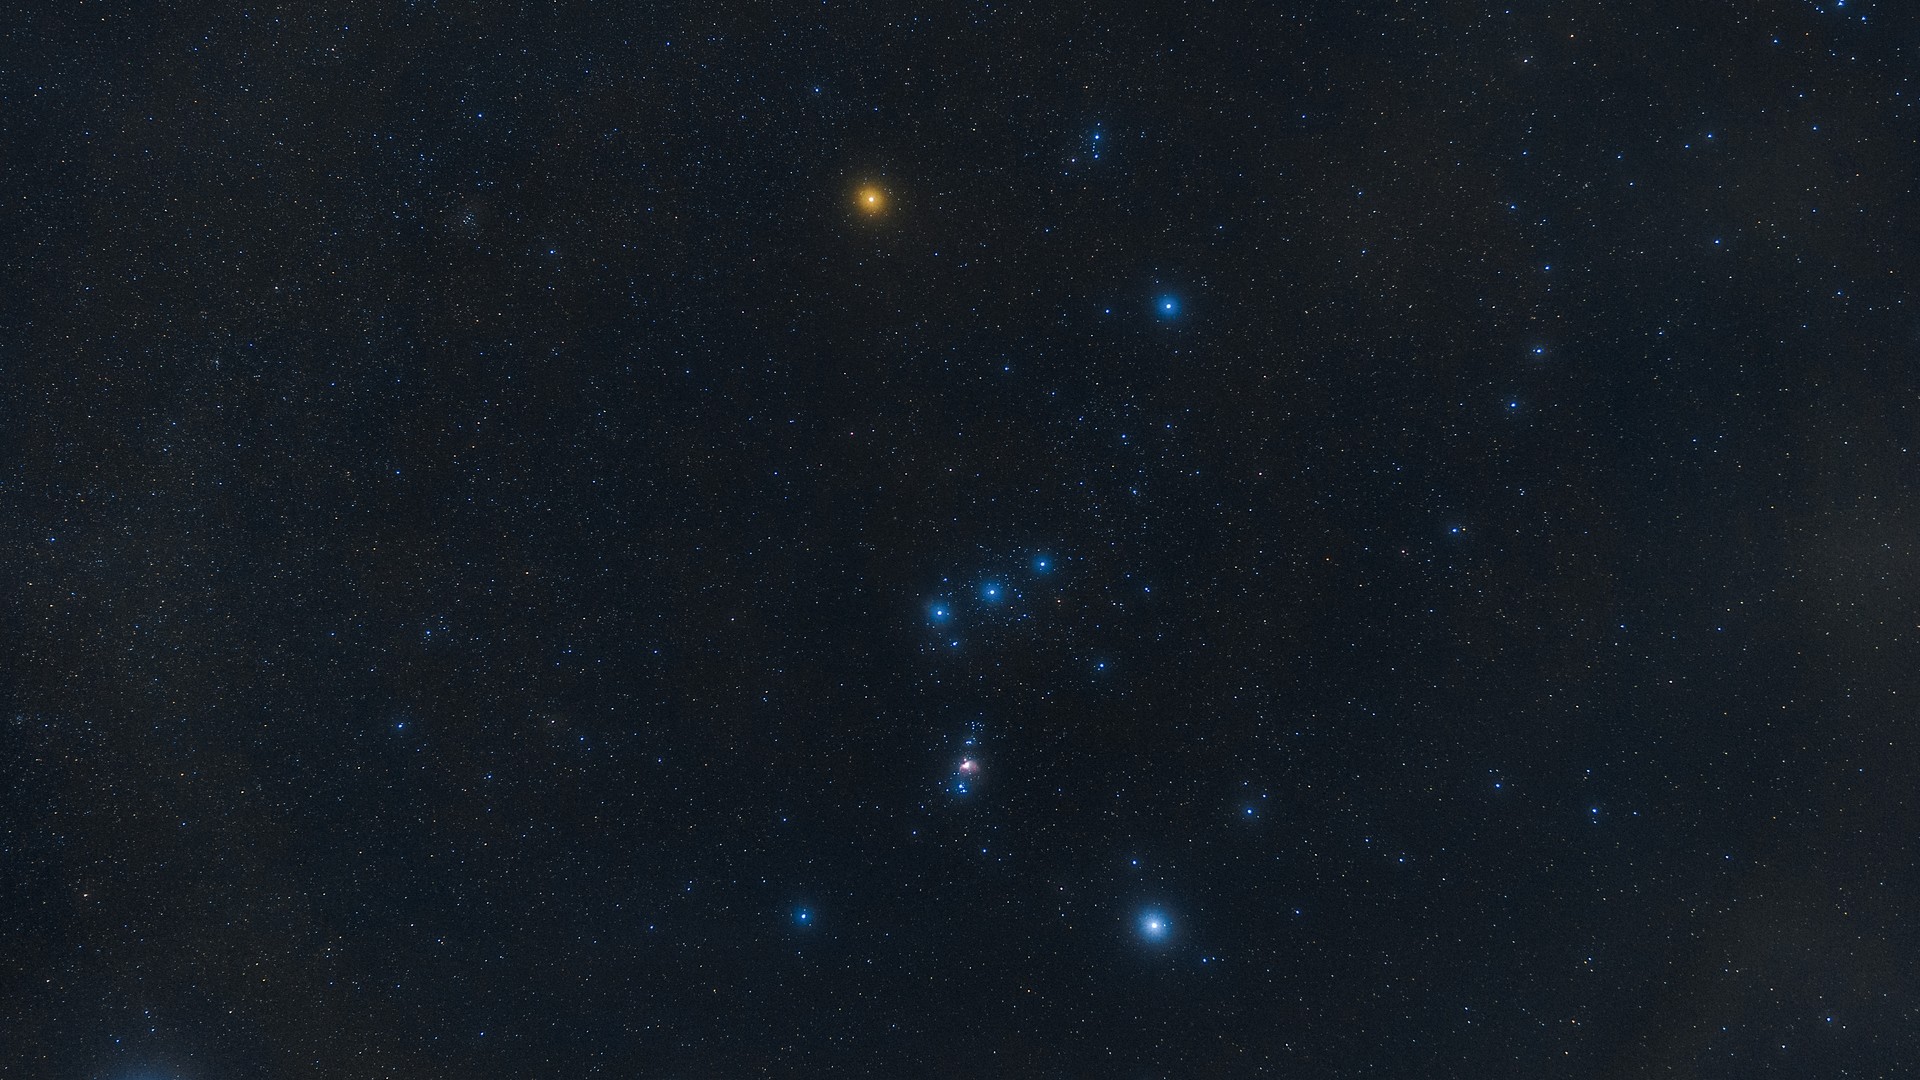 An asteroid will eclipse the puzzling red star Betelgeuse on Dec. 11 Space